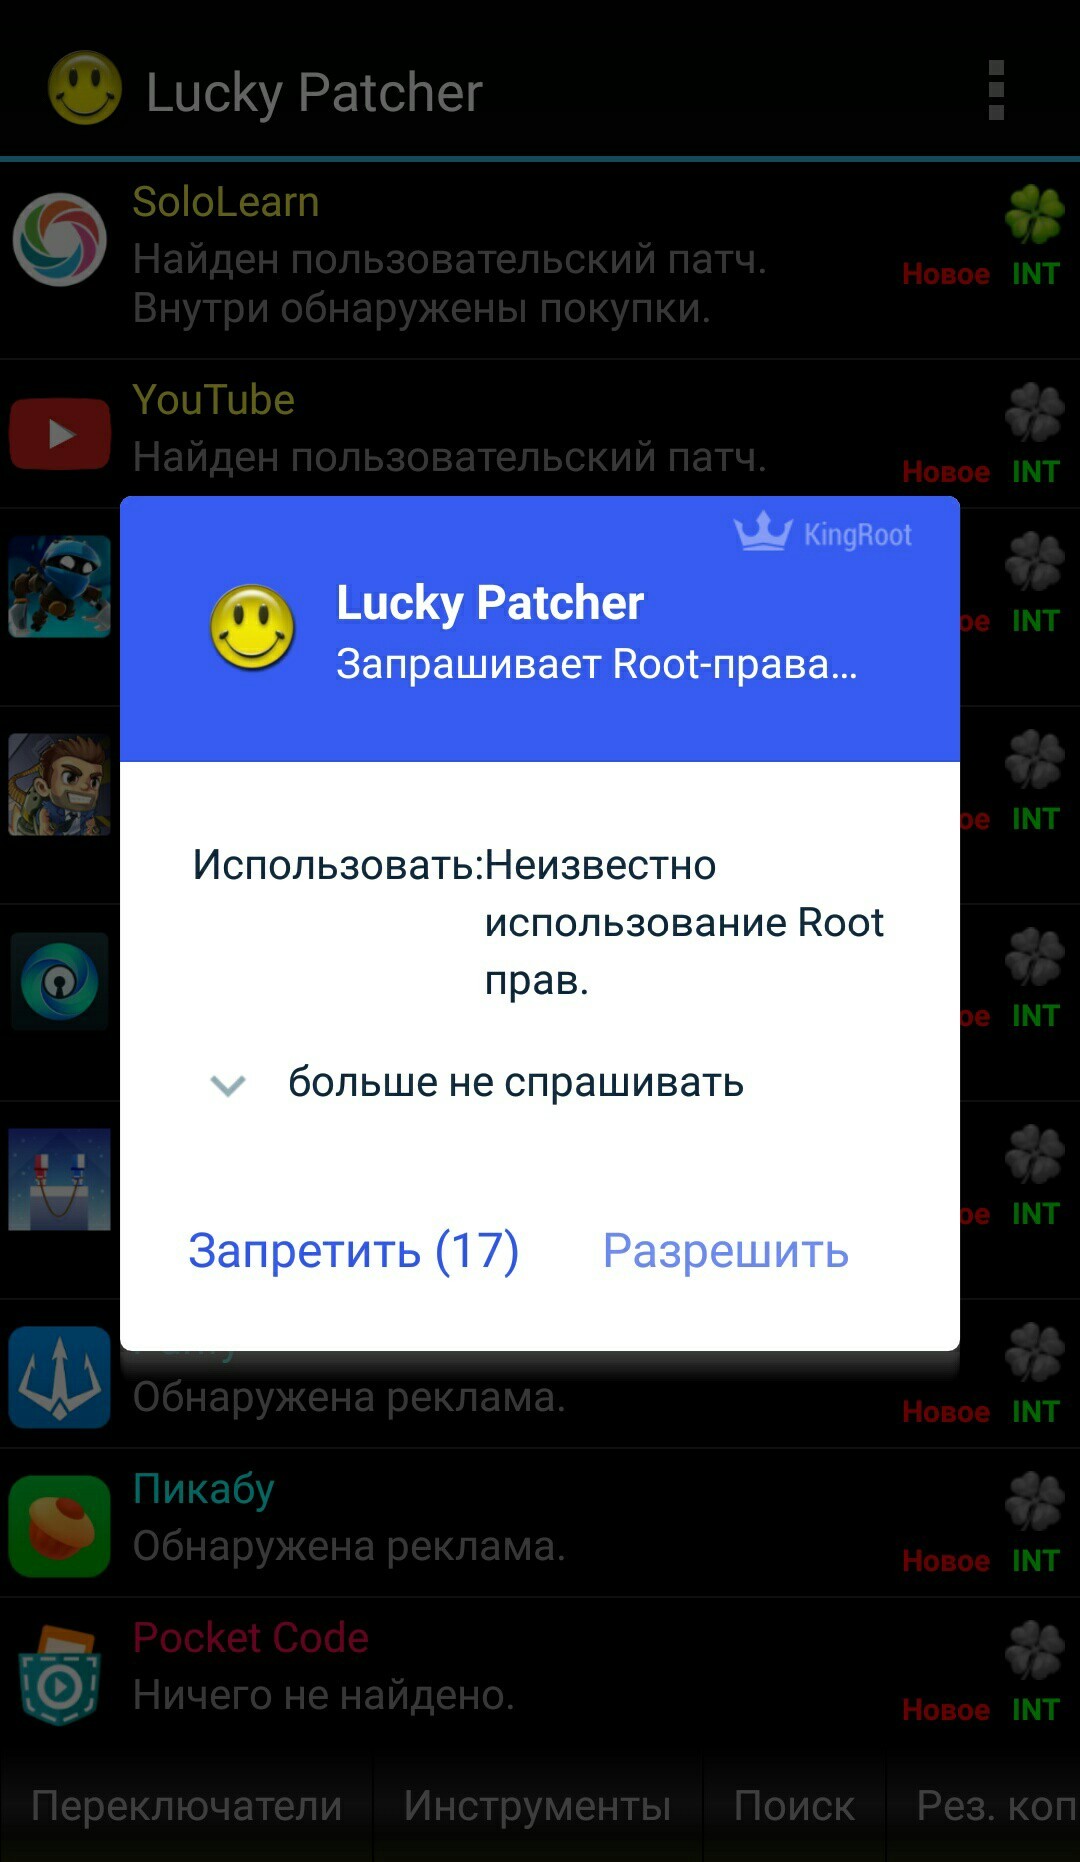 We remove ads from various applications on ANDROID - Patch, Advertising, Longpost